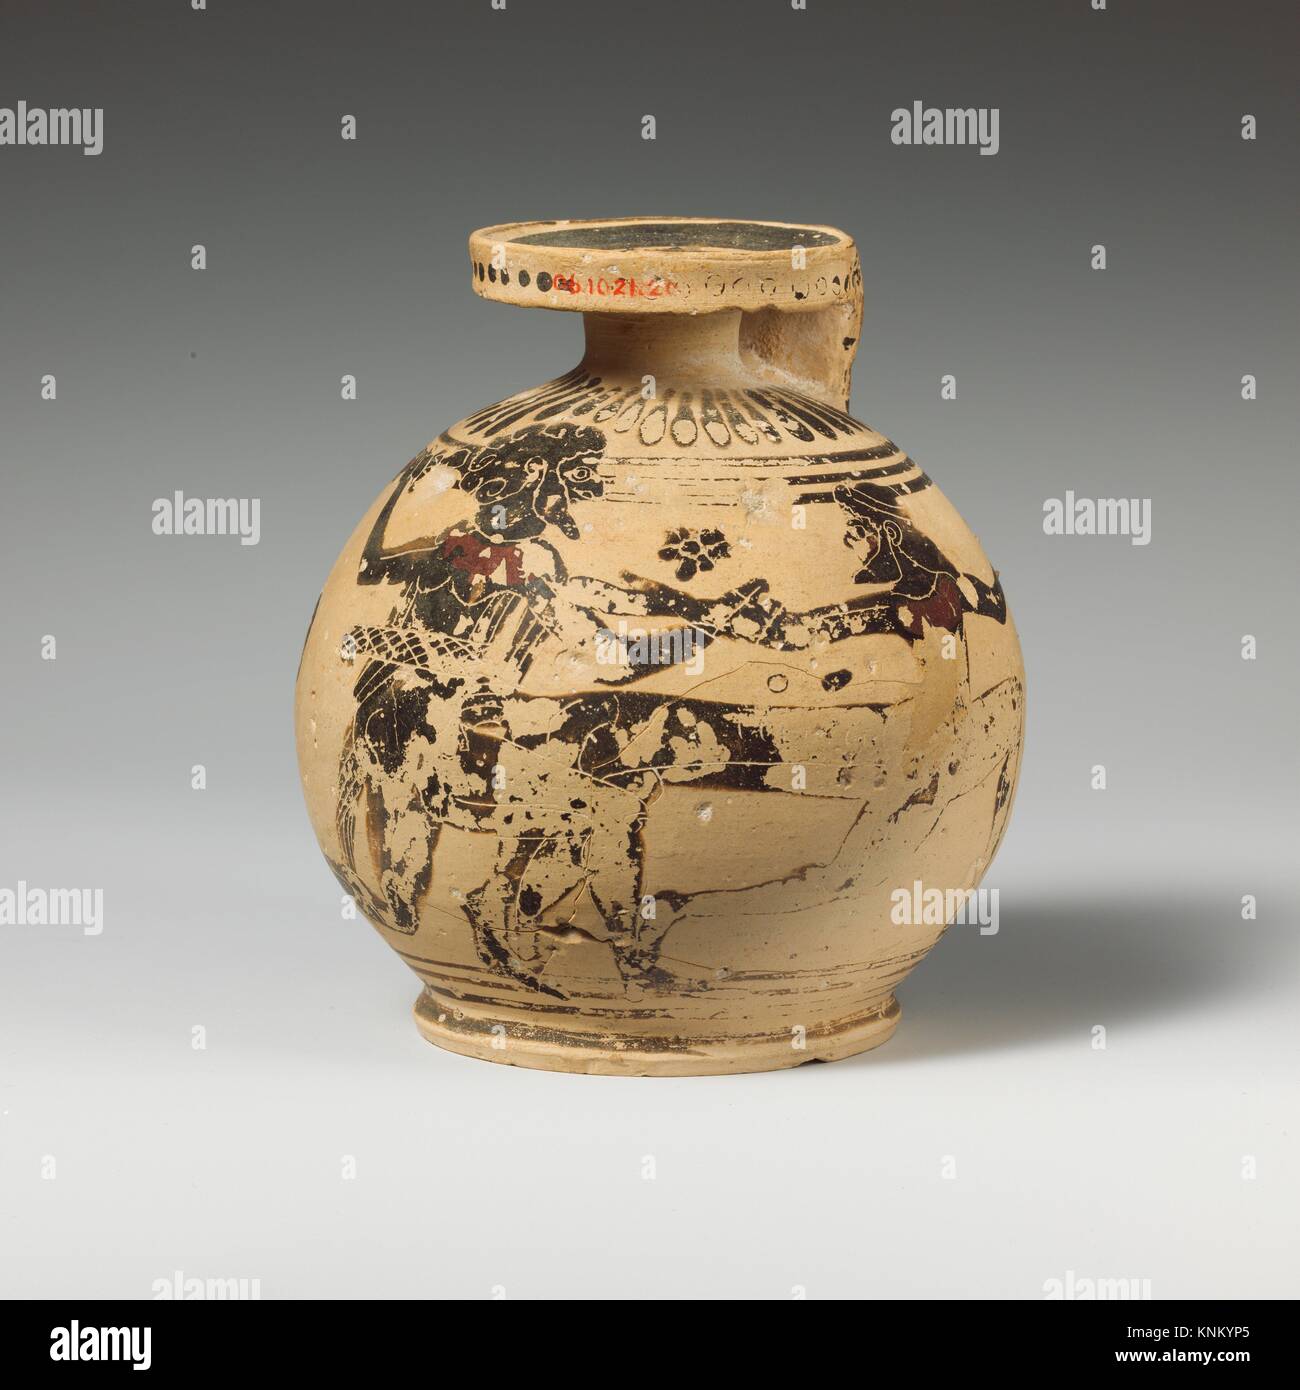 Terracotta aryballos (oil flask). Attributed to the Otterlo Painter; Period: Middle Corinthian; Date: ca. 595-570 B.C; Culture: Greek, Corinthian; Stock Photo